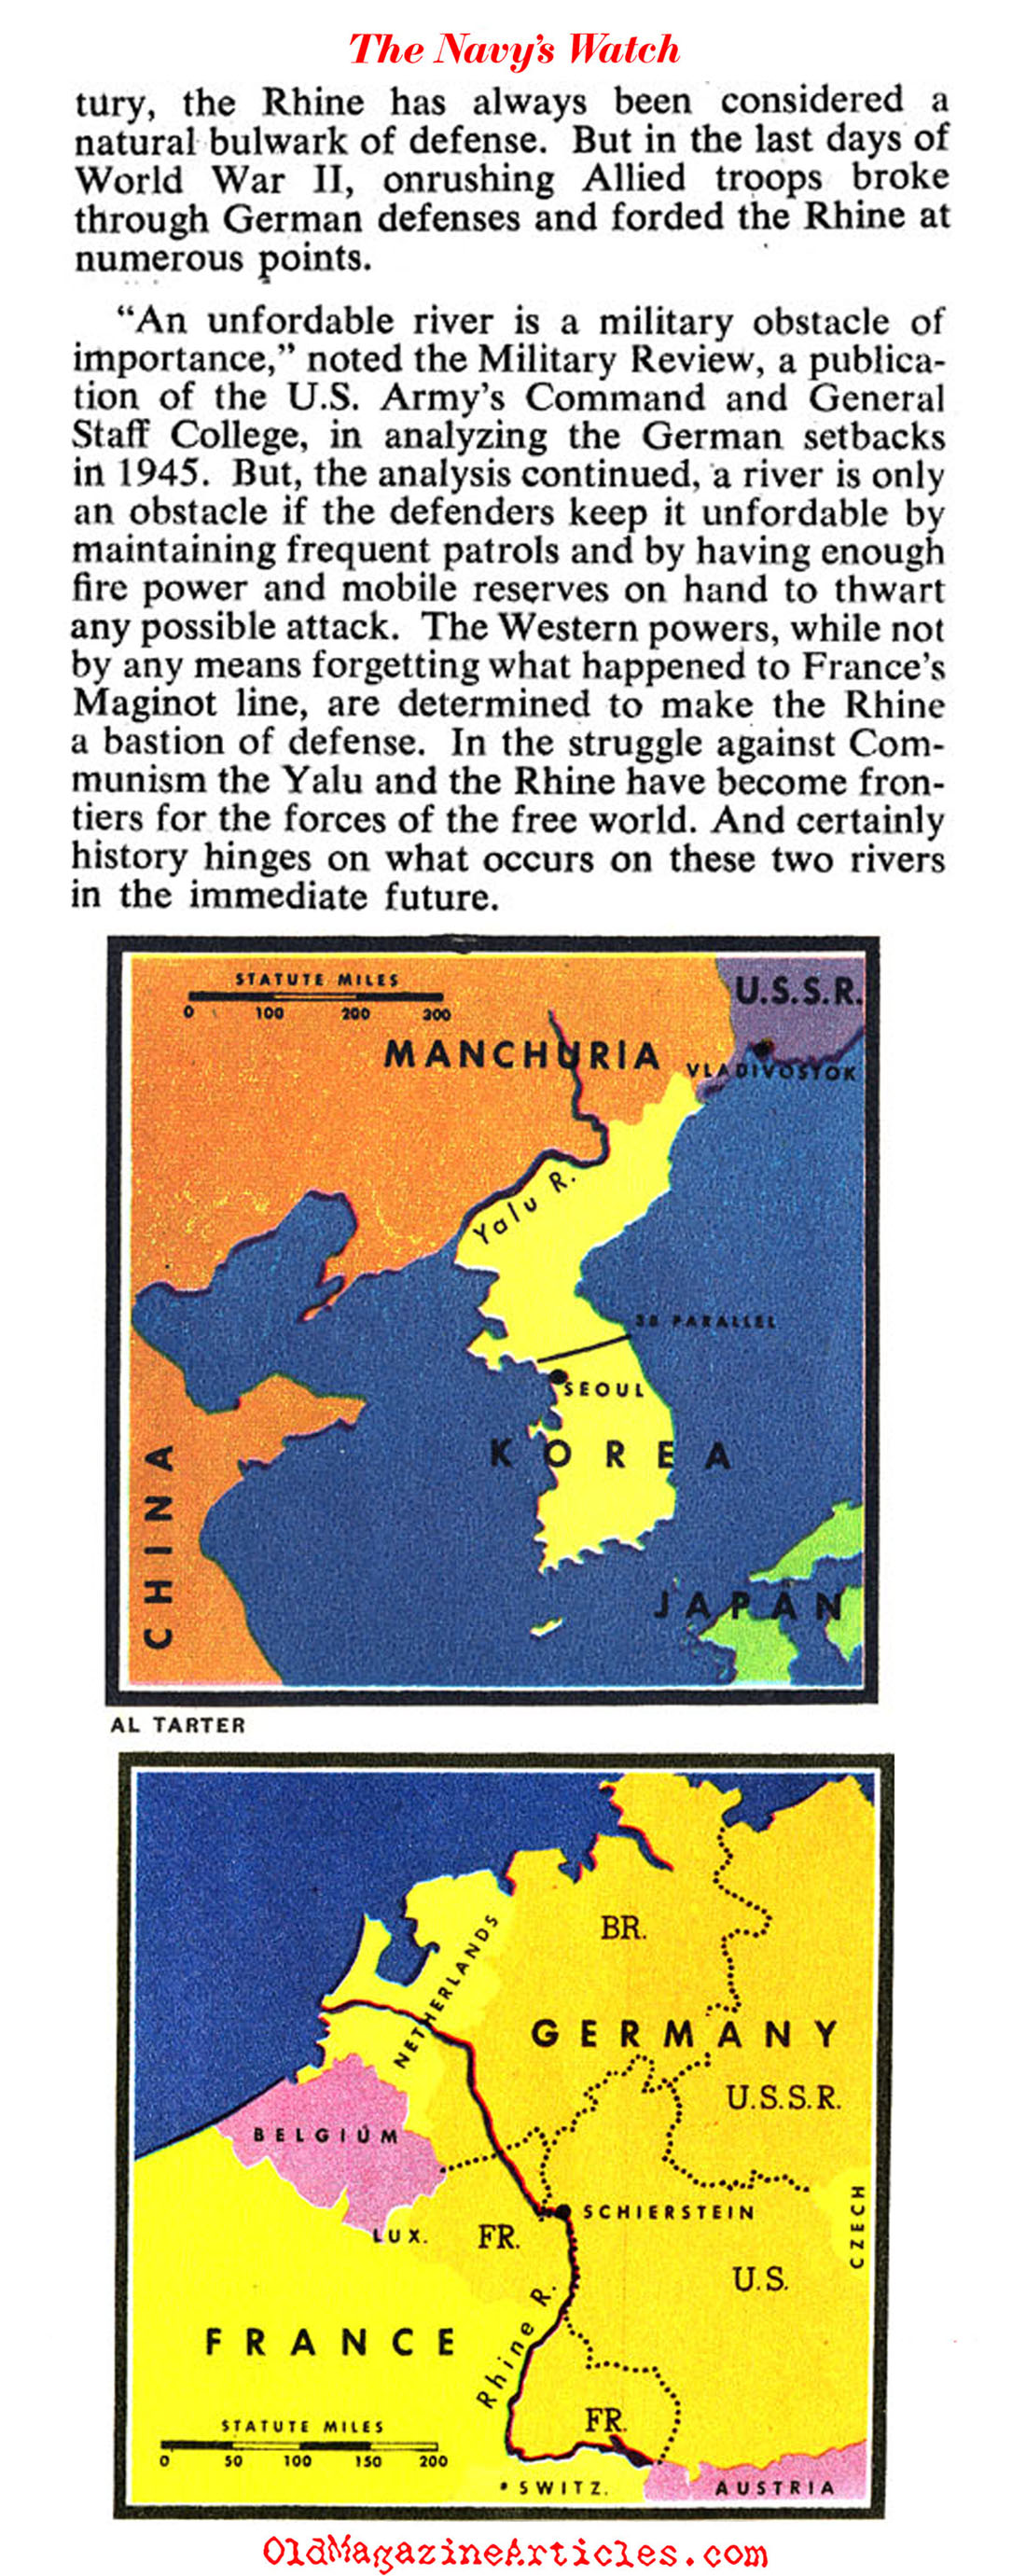 Two Important Rivers in the Cold War Struggle (Collier's Magazine, 1952)